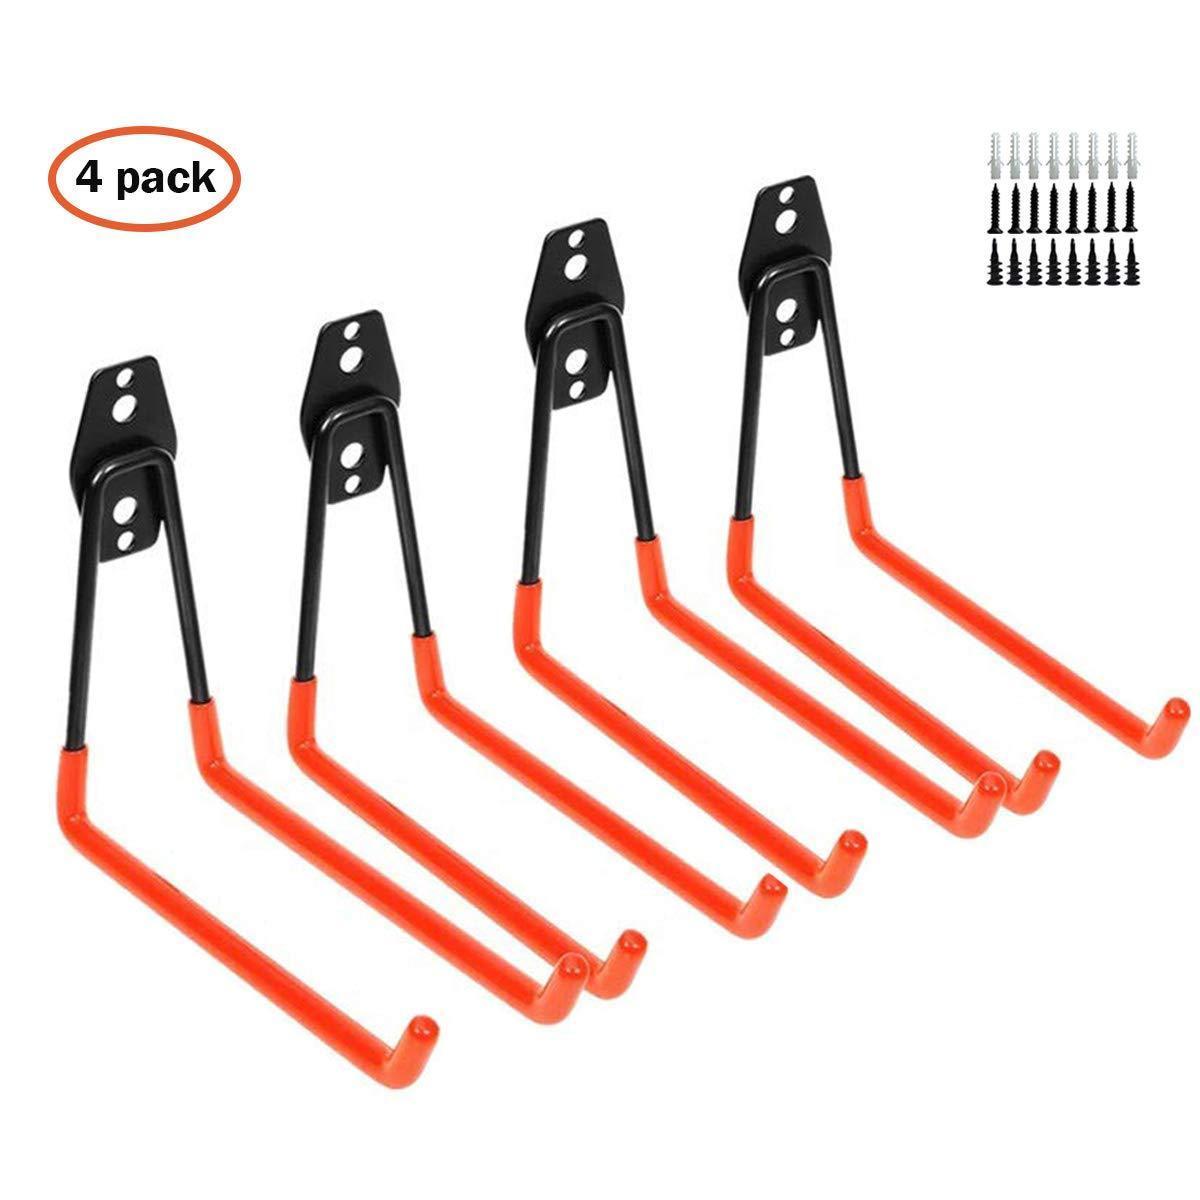 Garage Hooks Heavy Duty Storage Utility Hangers Wall Mount Garage Orgnaizier with Extended Double Arms for Ladders, Bikes, Heavy Tools, Garden Hoses, and Other Bulky Items (4 Pack/Orange Color)